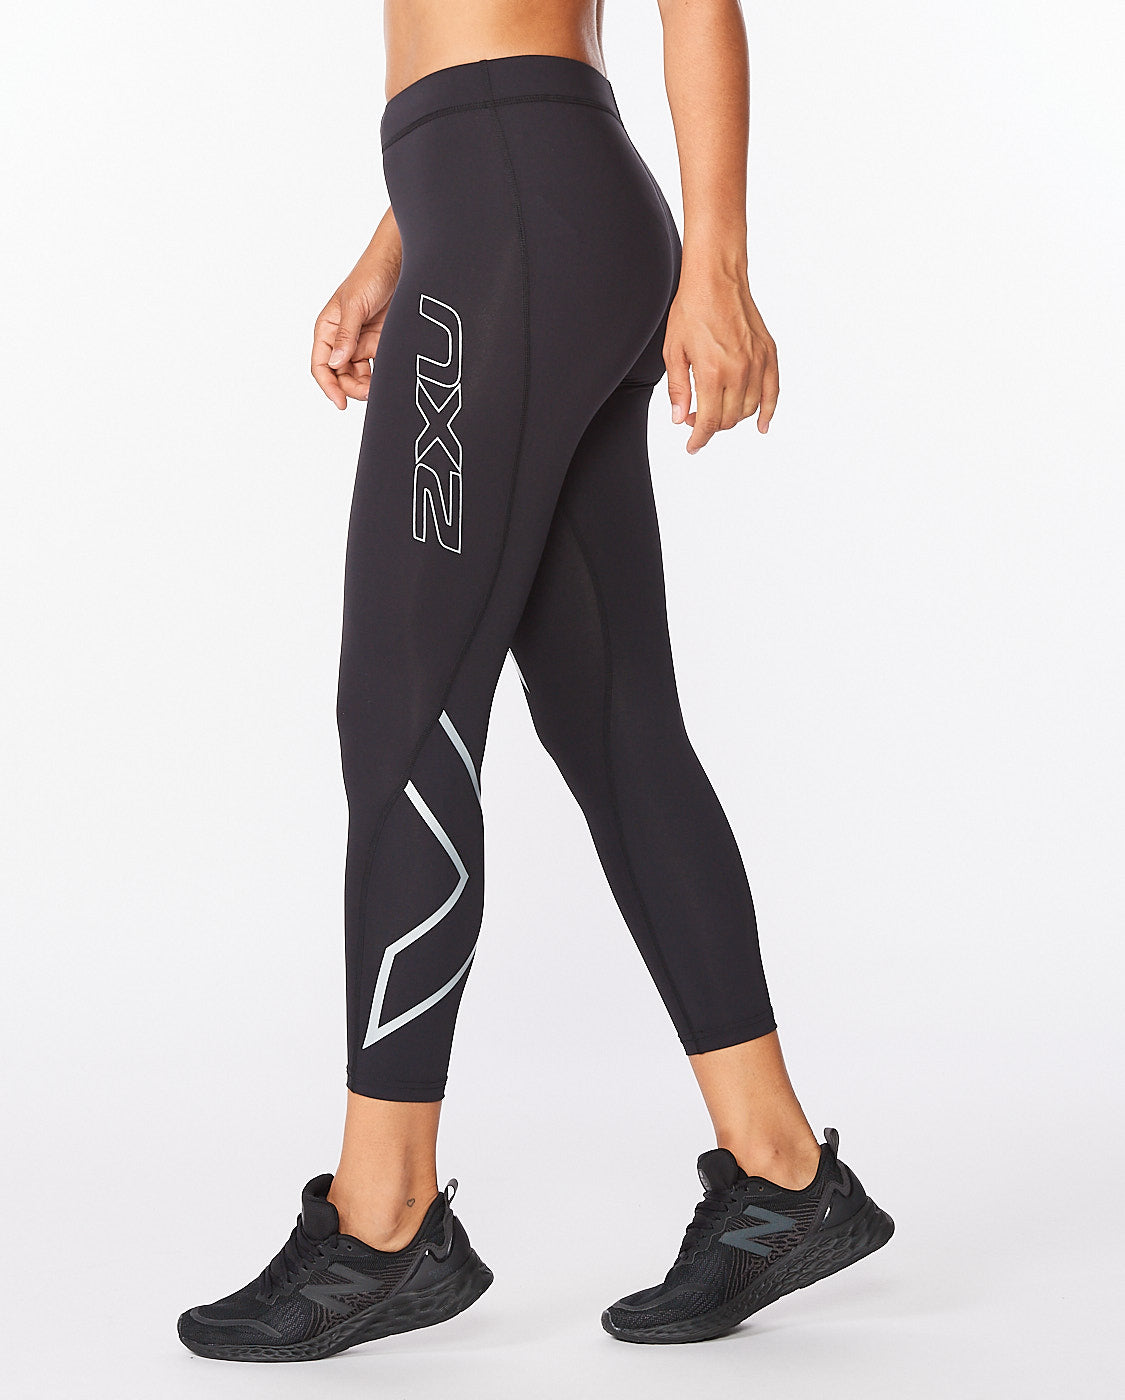 Base Women's 7/8 Compression Tights